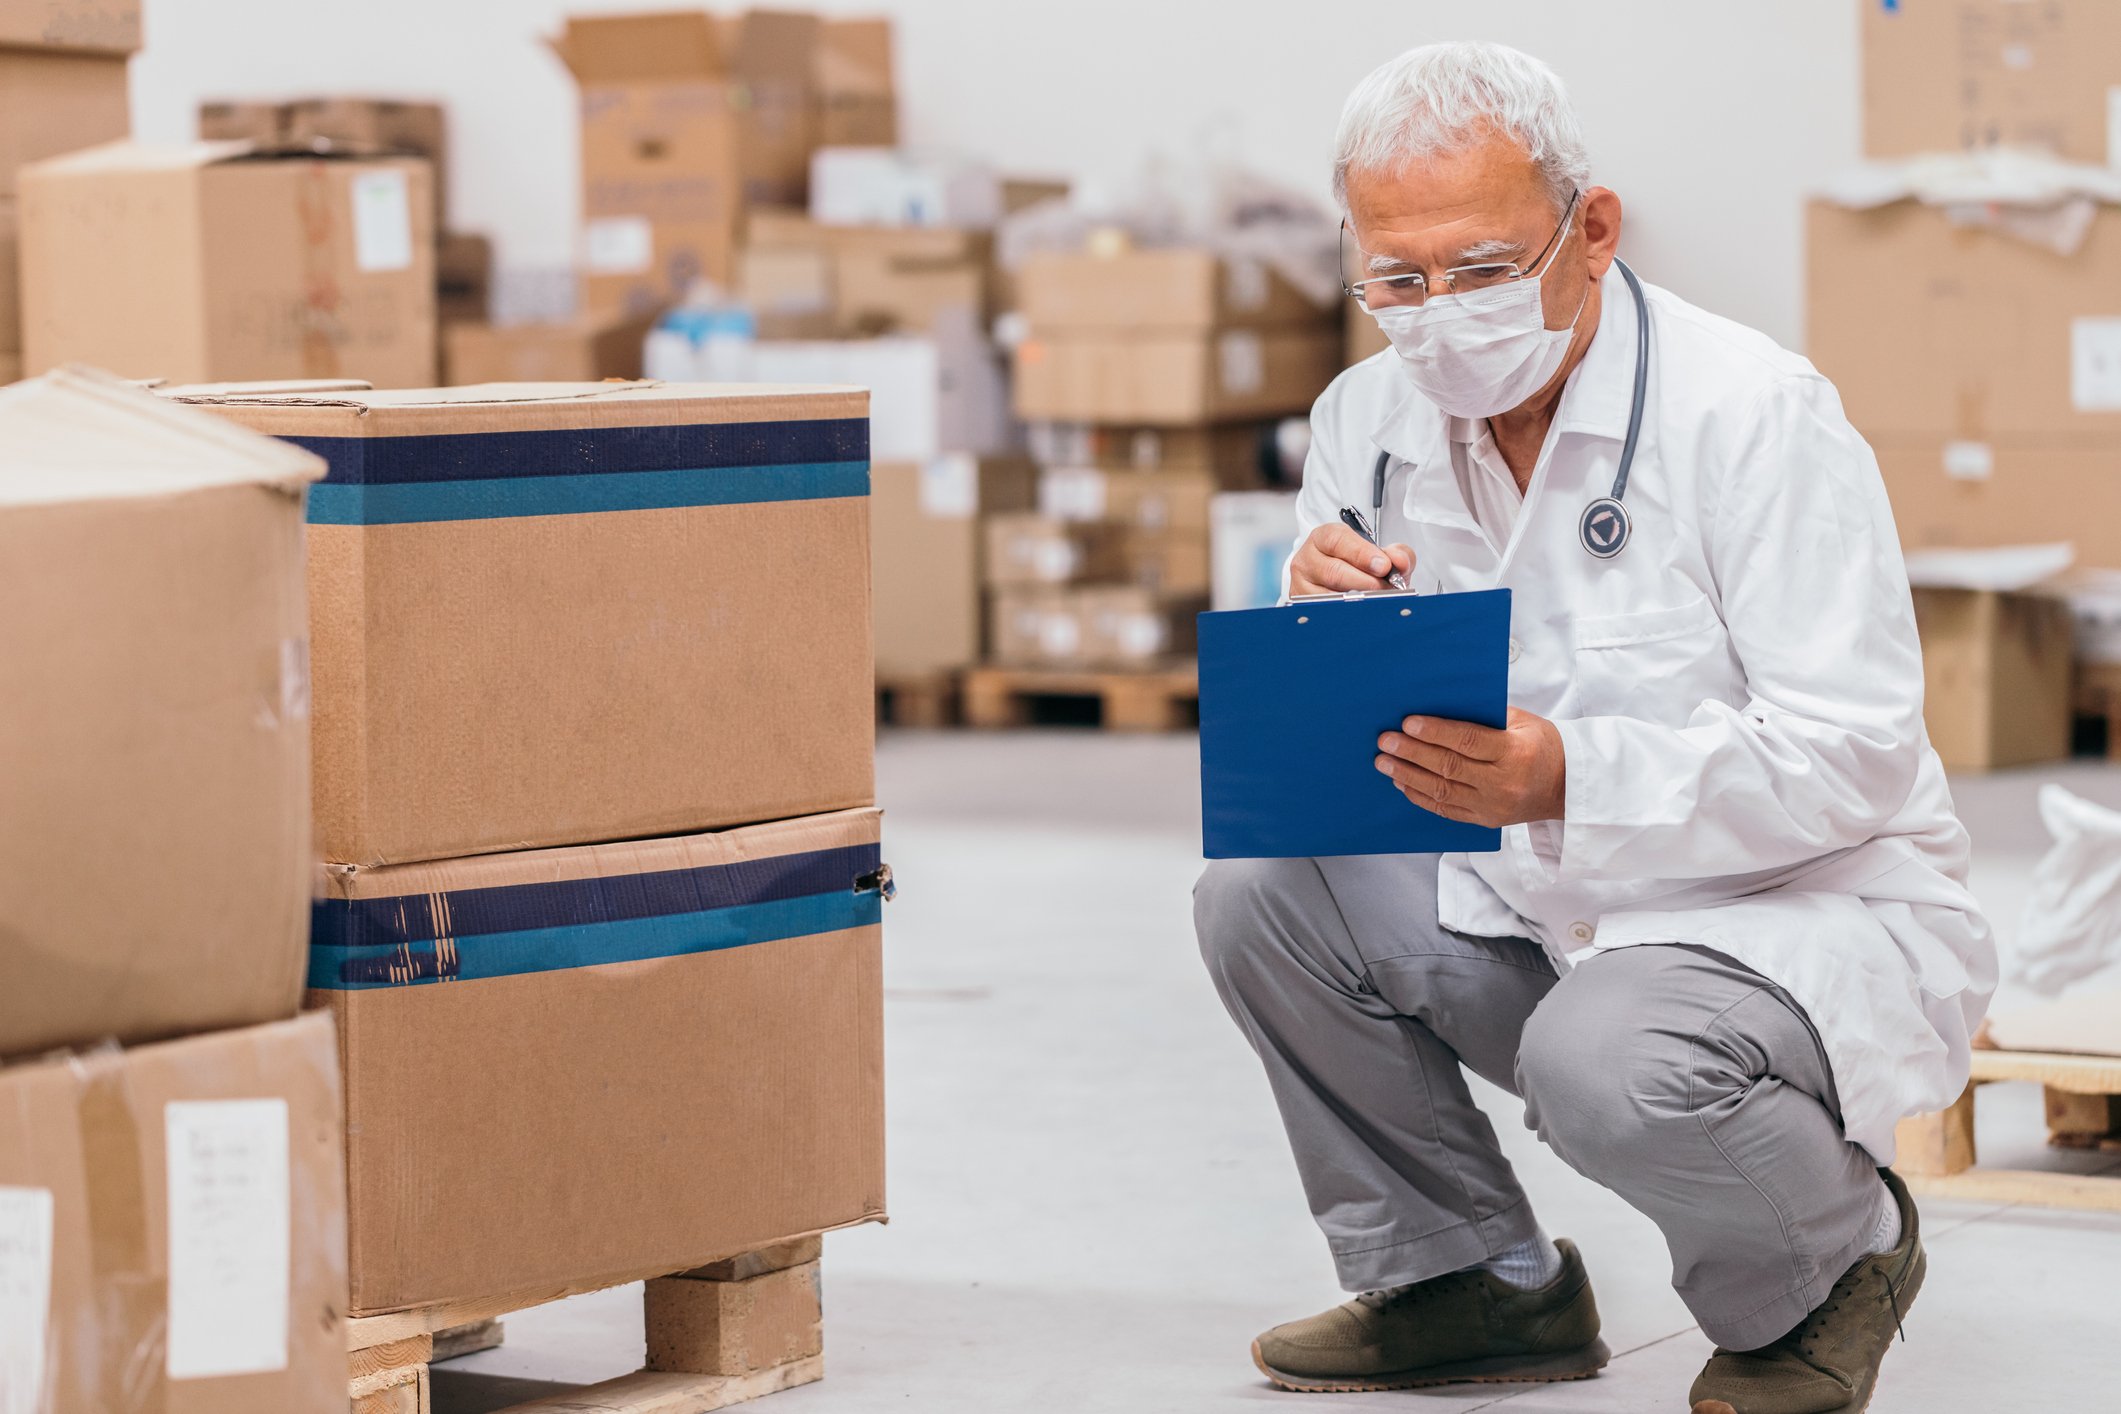 medical professional examining a checklist while crouched down and looking at boxes of stored medical equipment